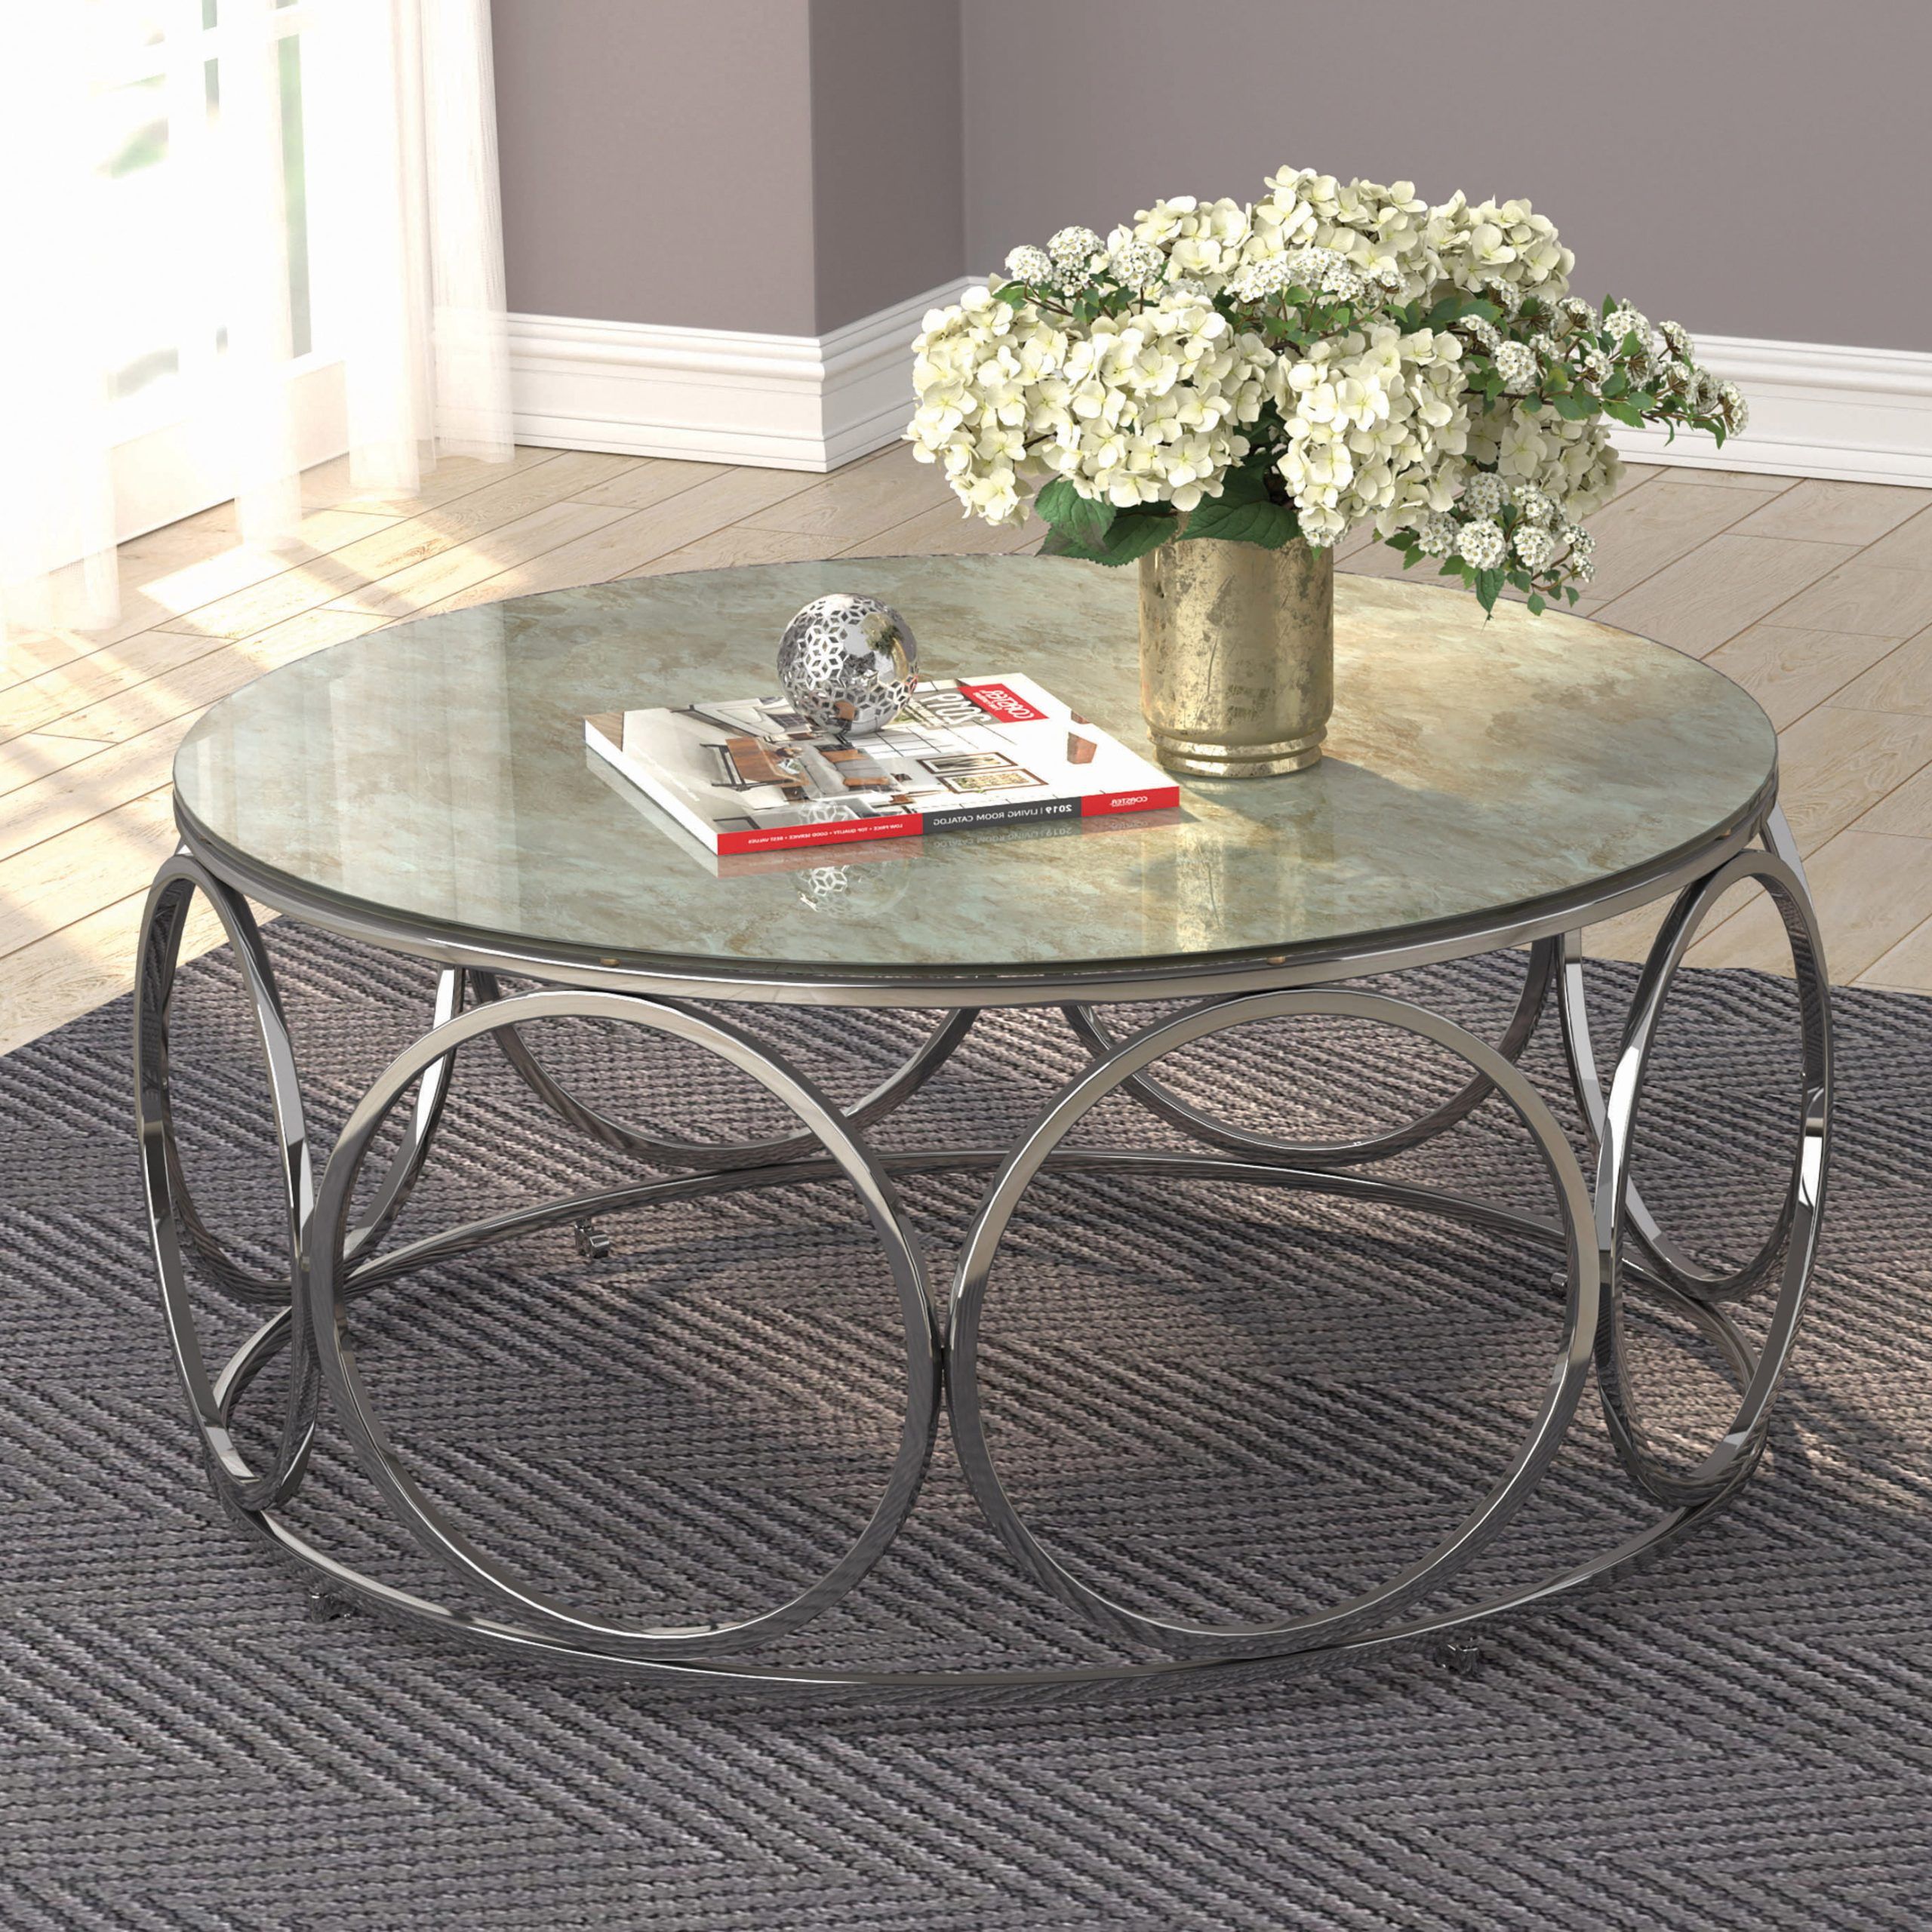 Latest Round Coffee Table With Casters Beige Marble And Chrome – Walmart Intended For Round Coffee Tables (View 9 of 15)